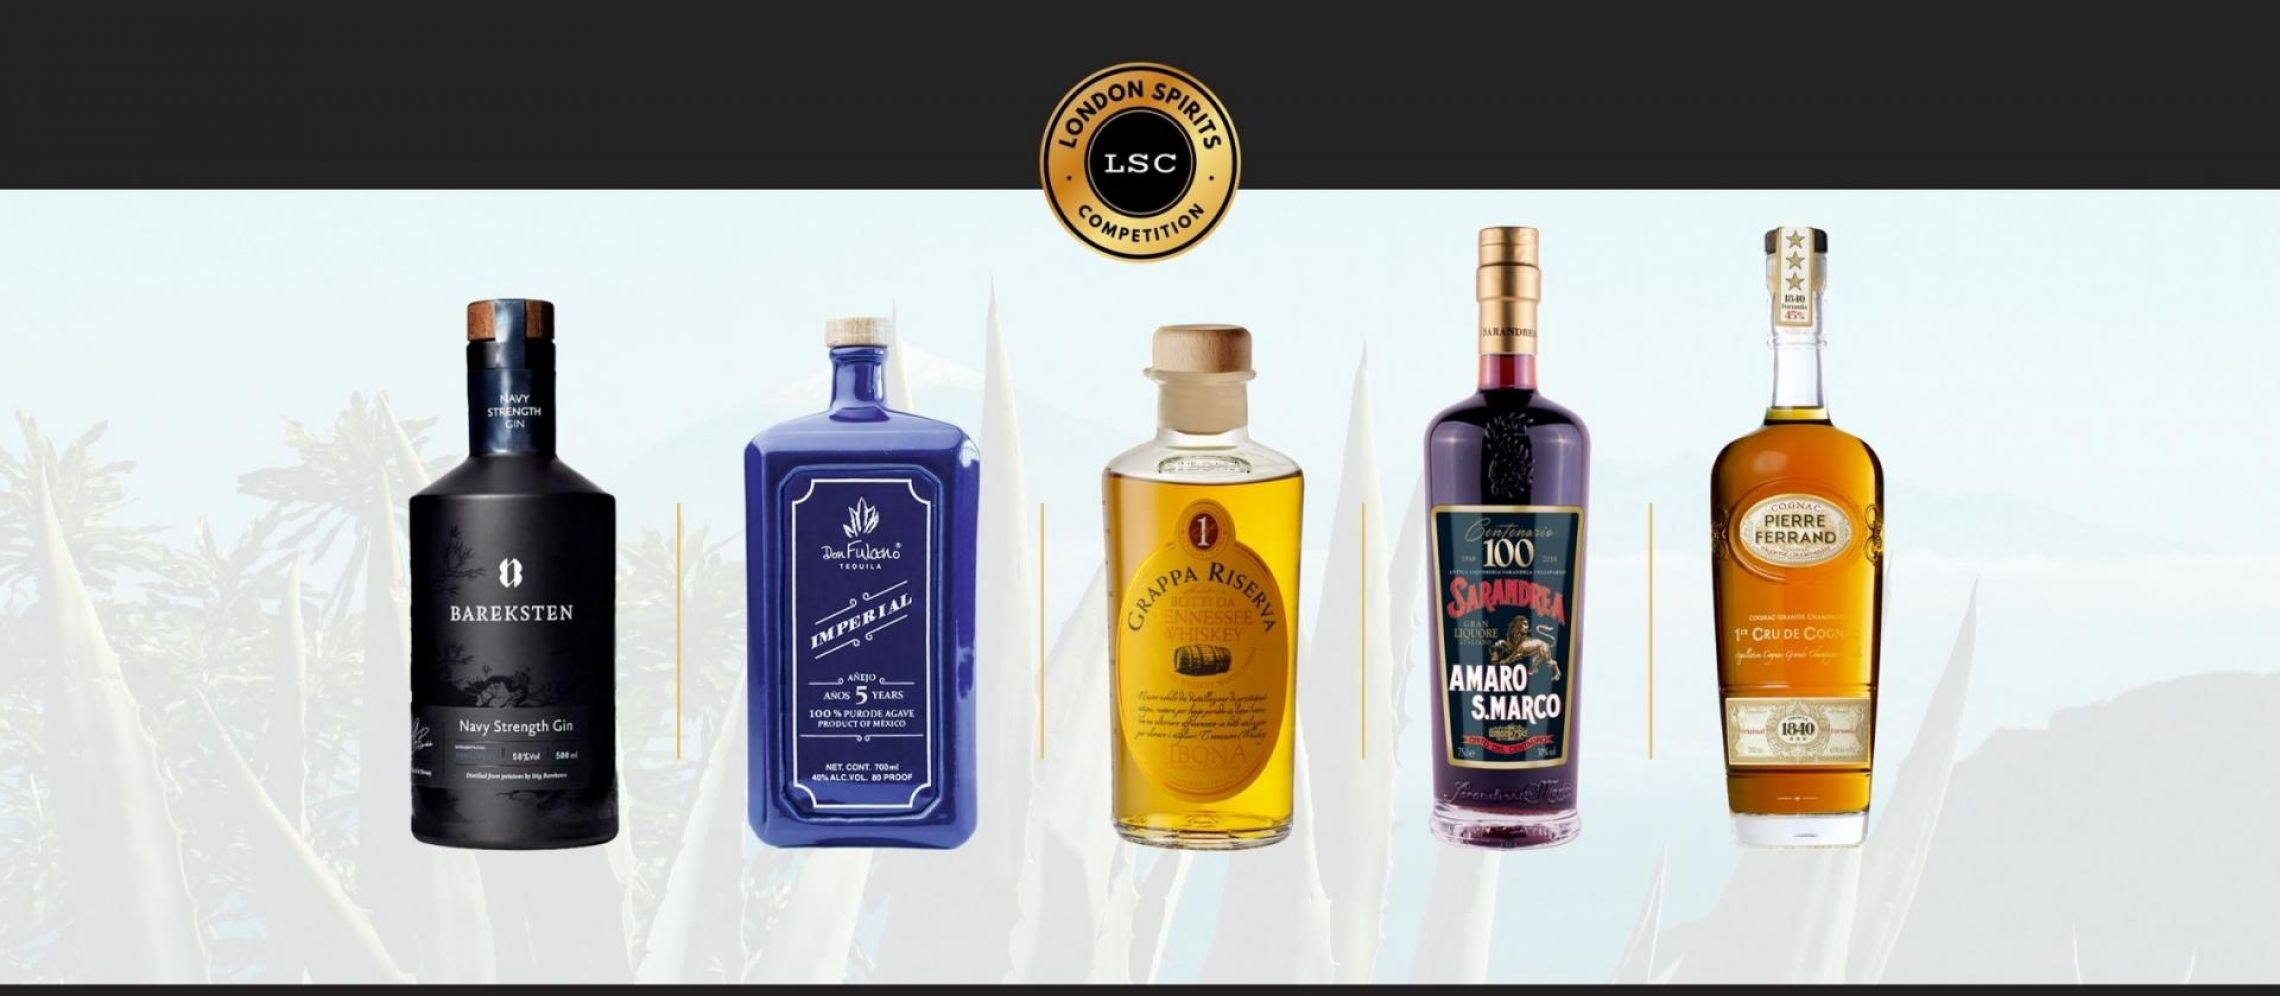 Photo for: Irish Whiskey wins Best Value Spirit at the 2022 London Spirits Competition